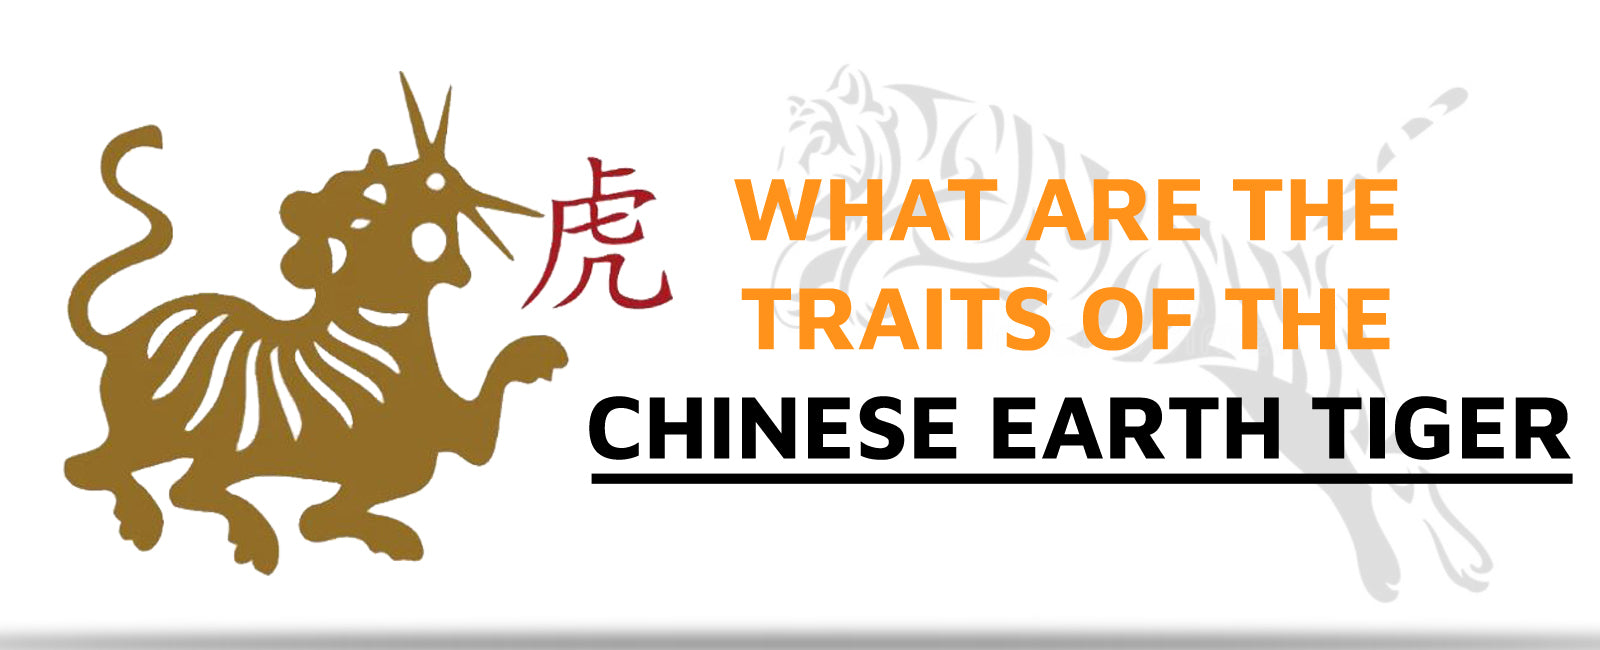 What are the Traits of the Chinese Earth Tiger